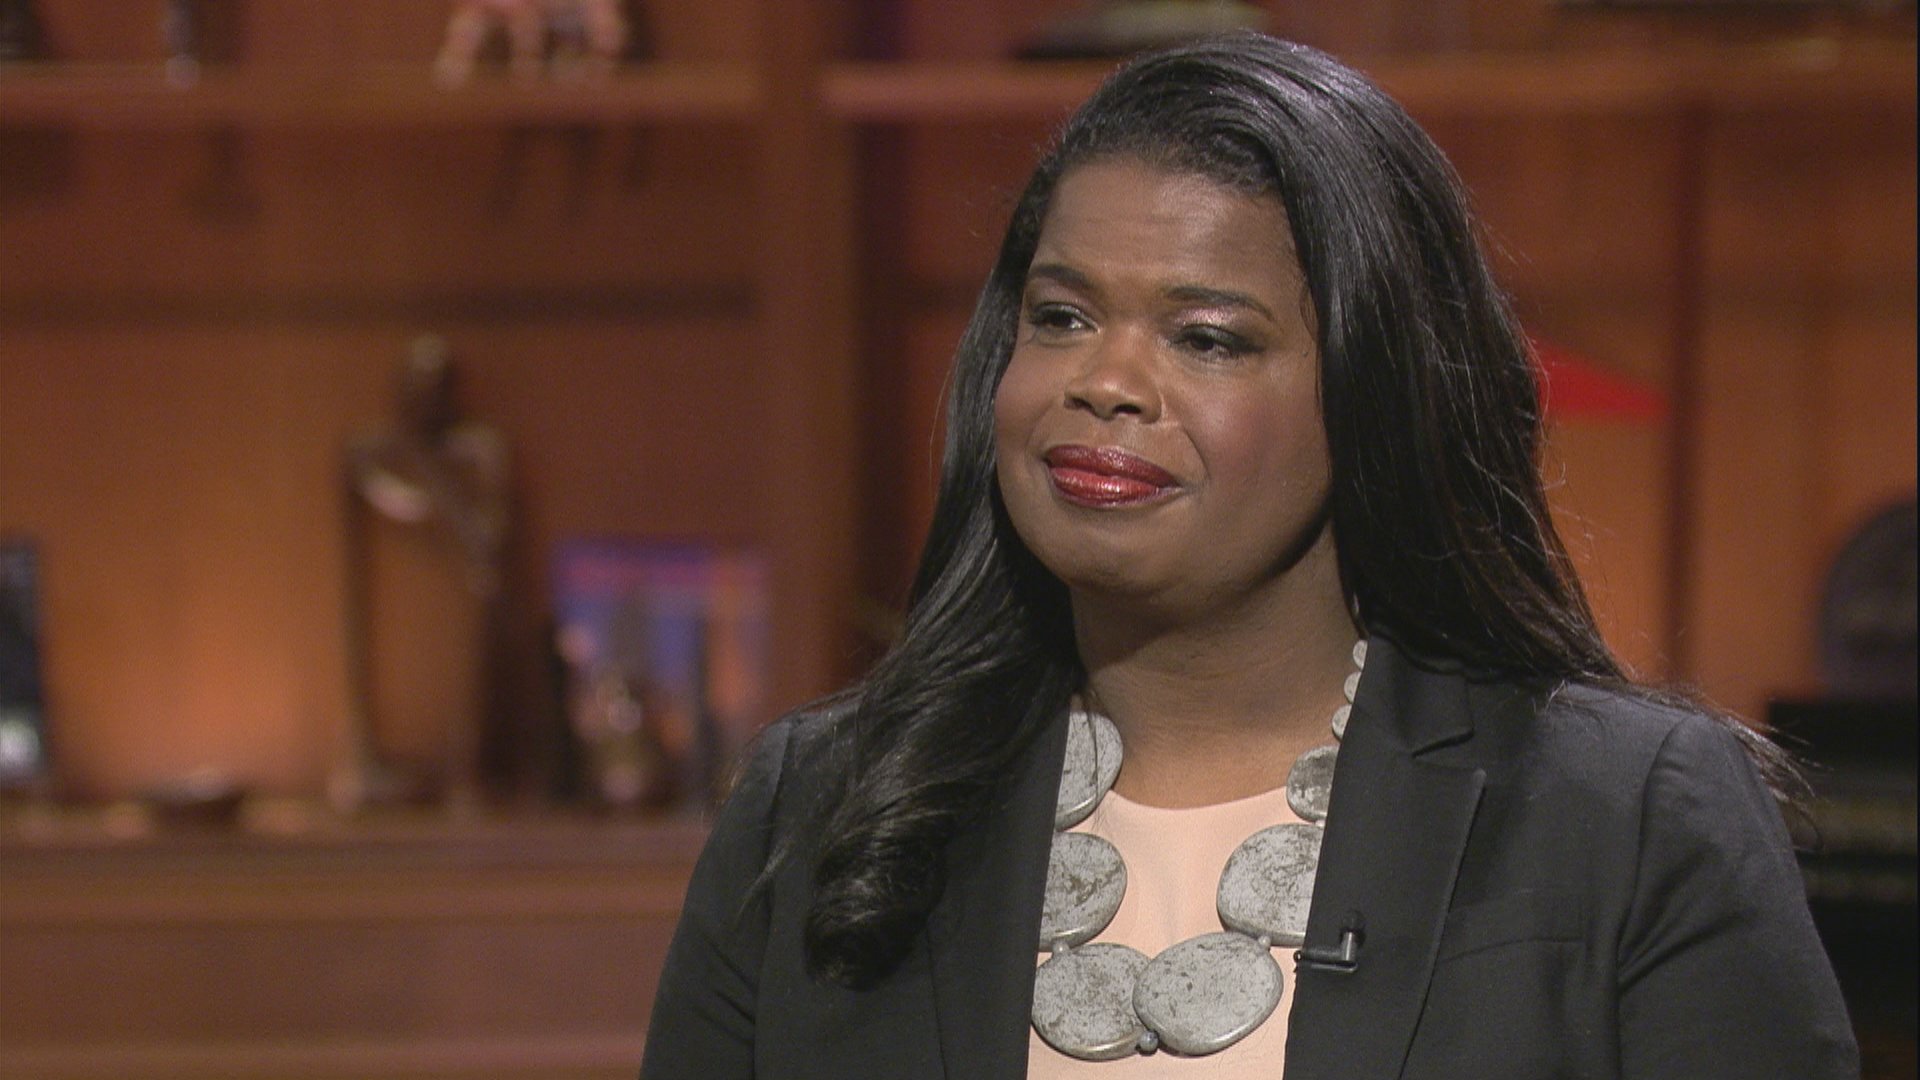 Cook County State’s Attorney Kim Foxx appears on “Chicago Tonight” on Dec. 20, 2018.